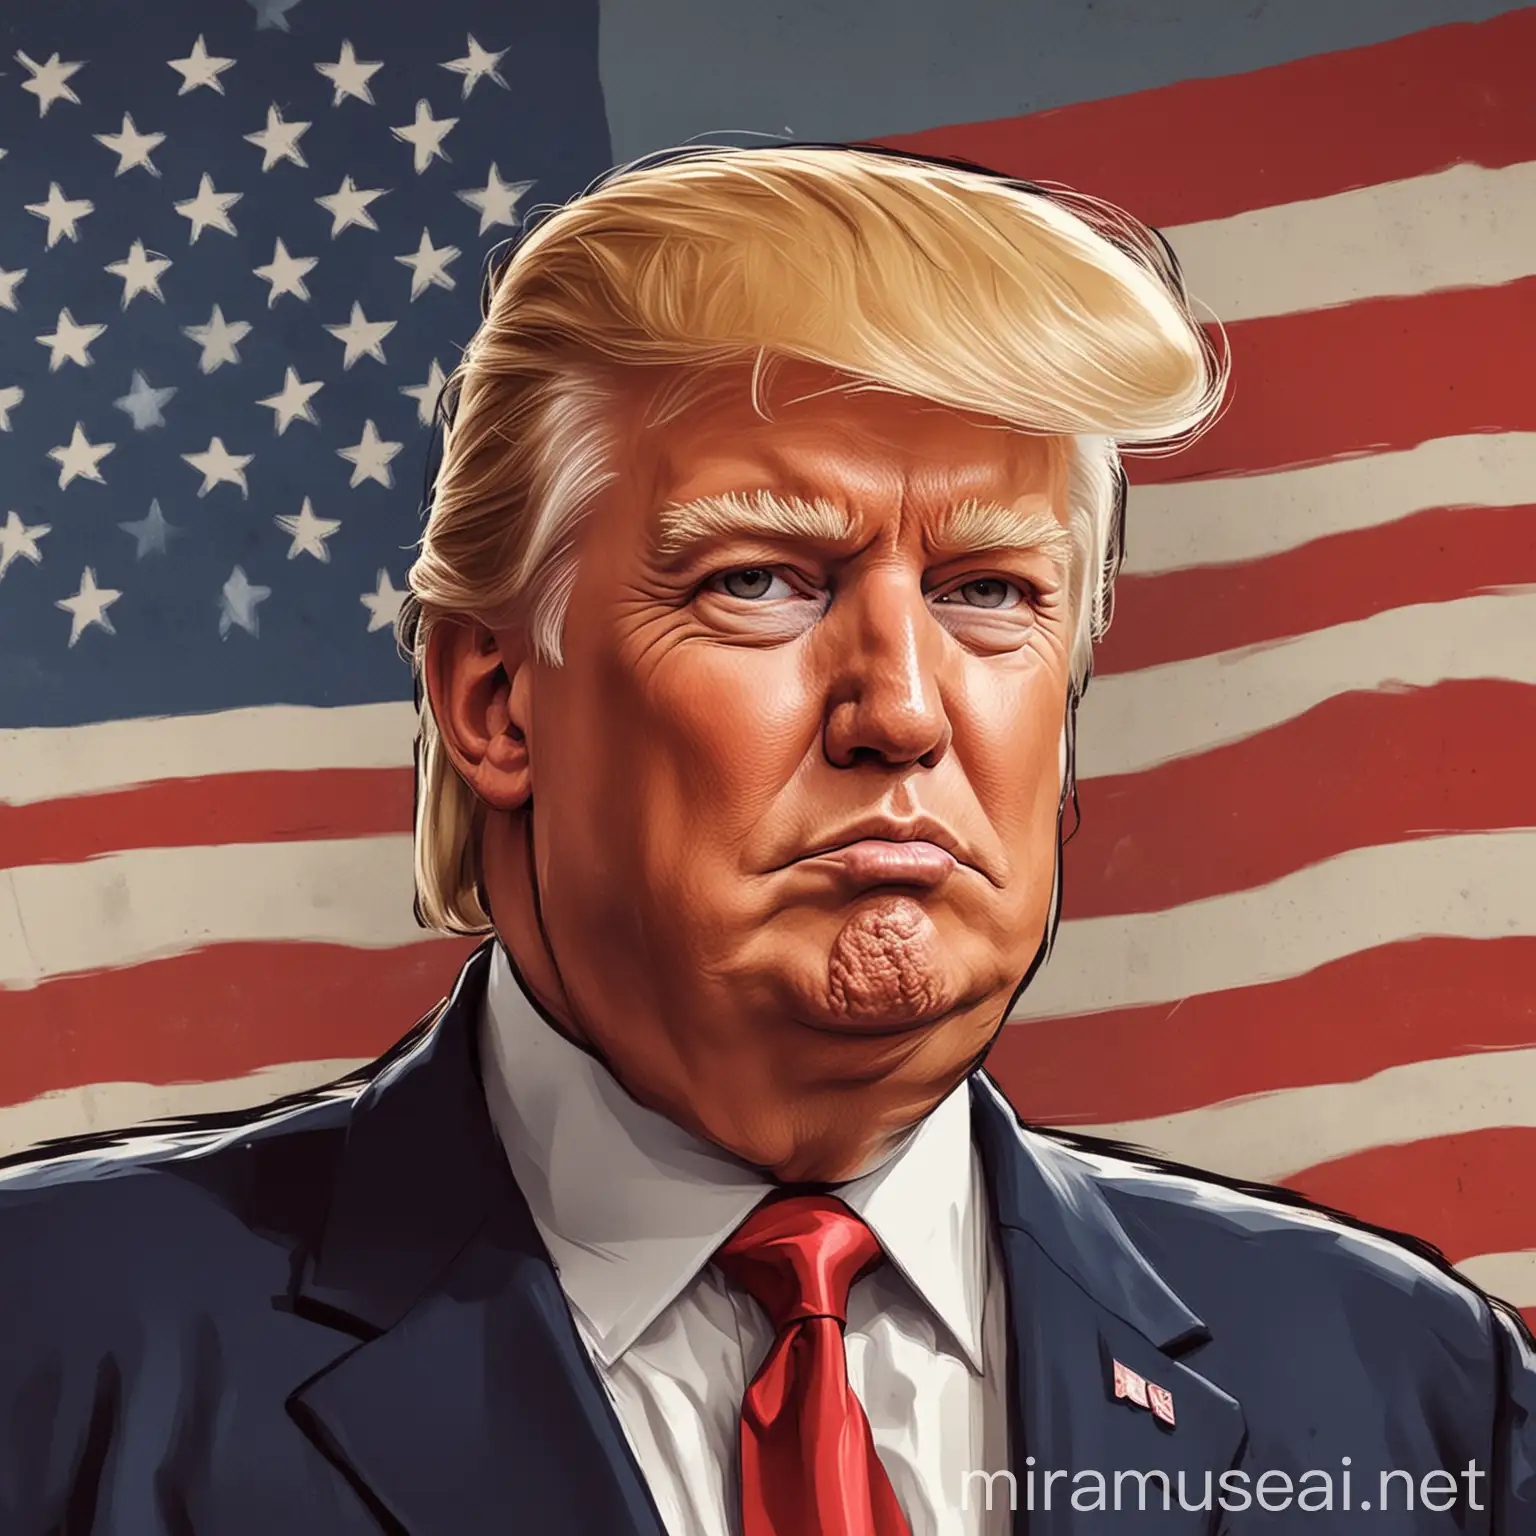 Cartoon Style Donald Trump with American Flag Background